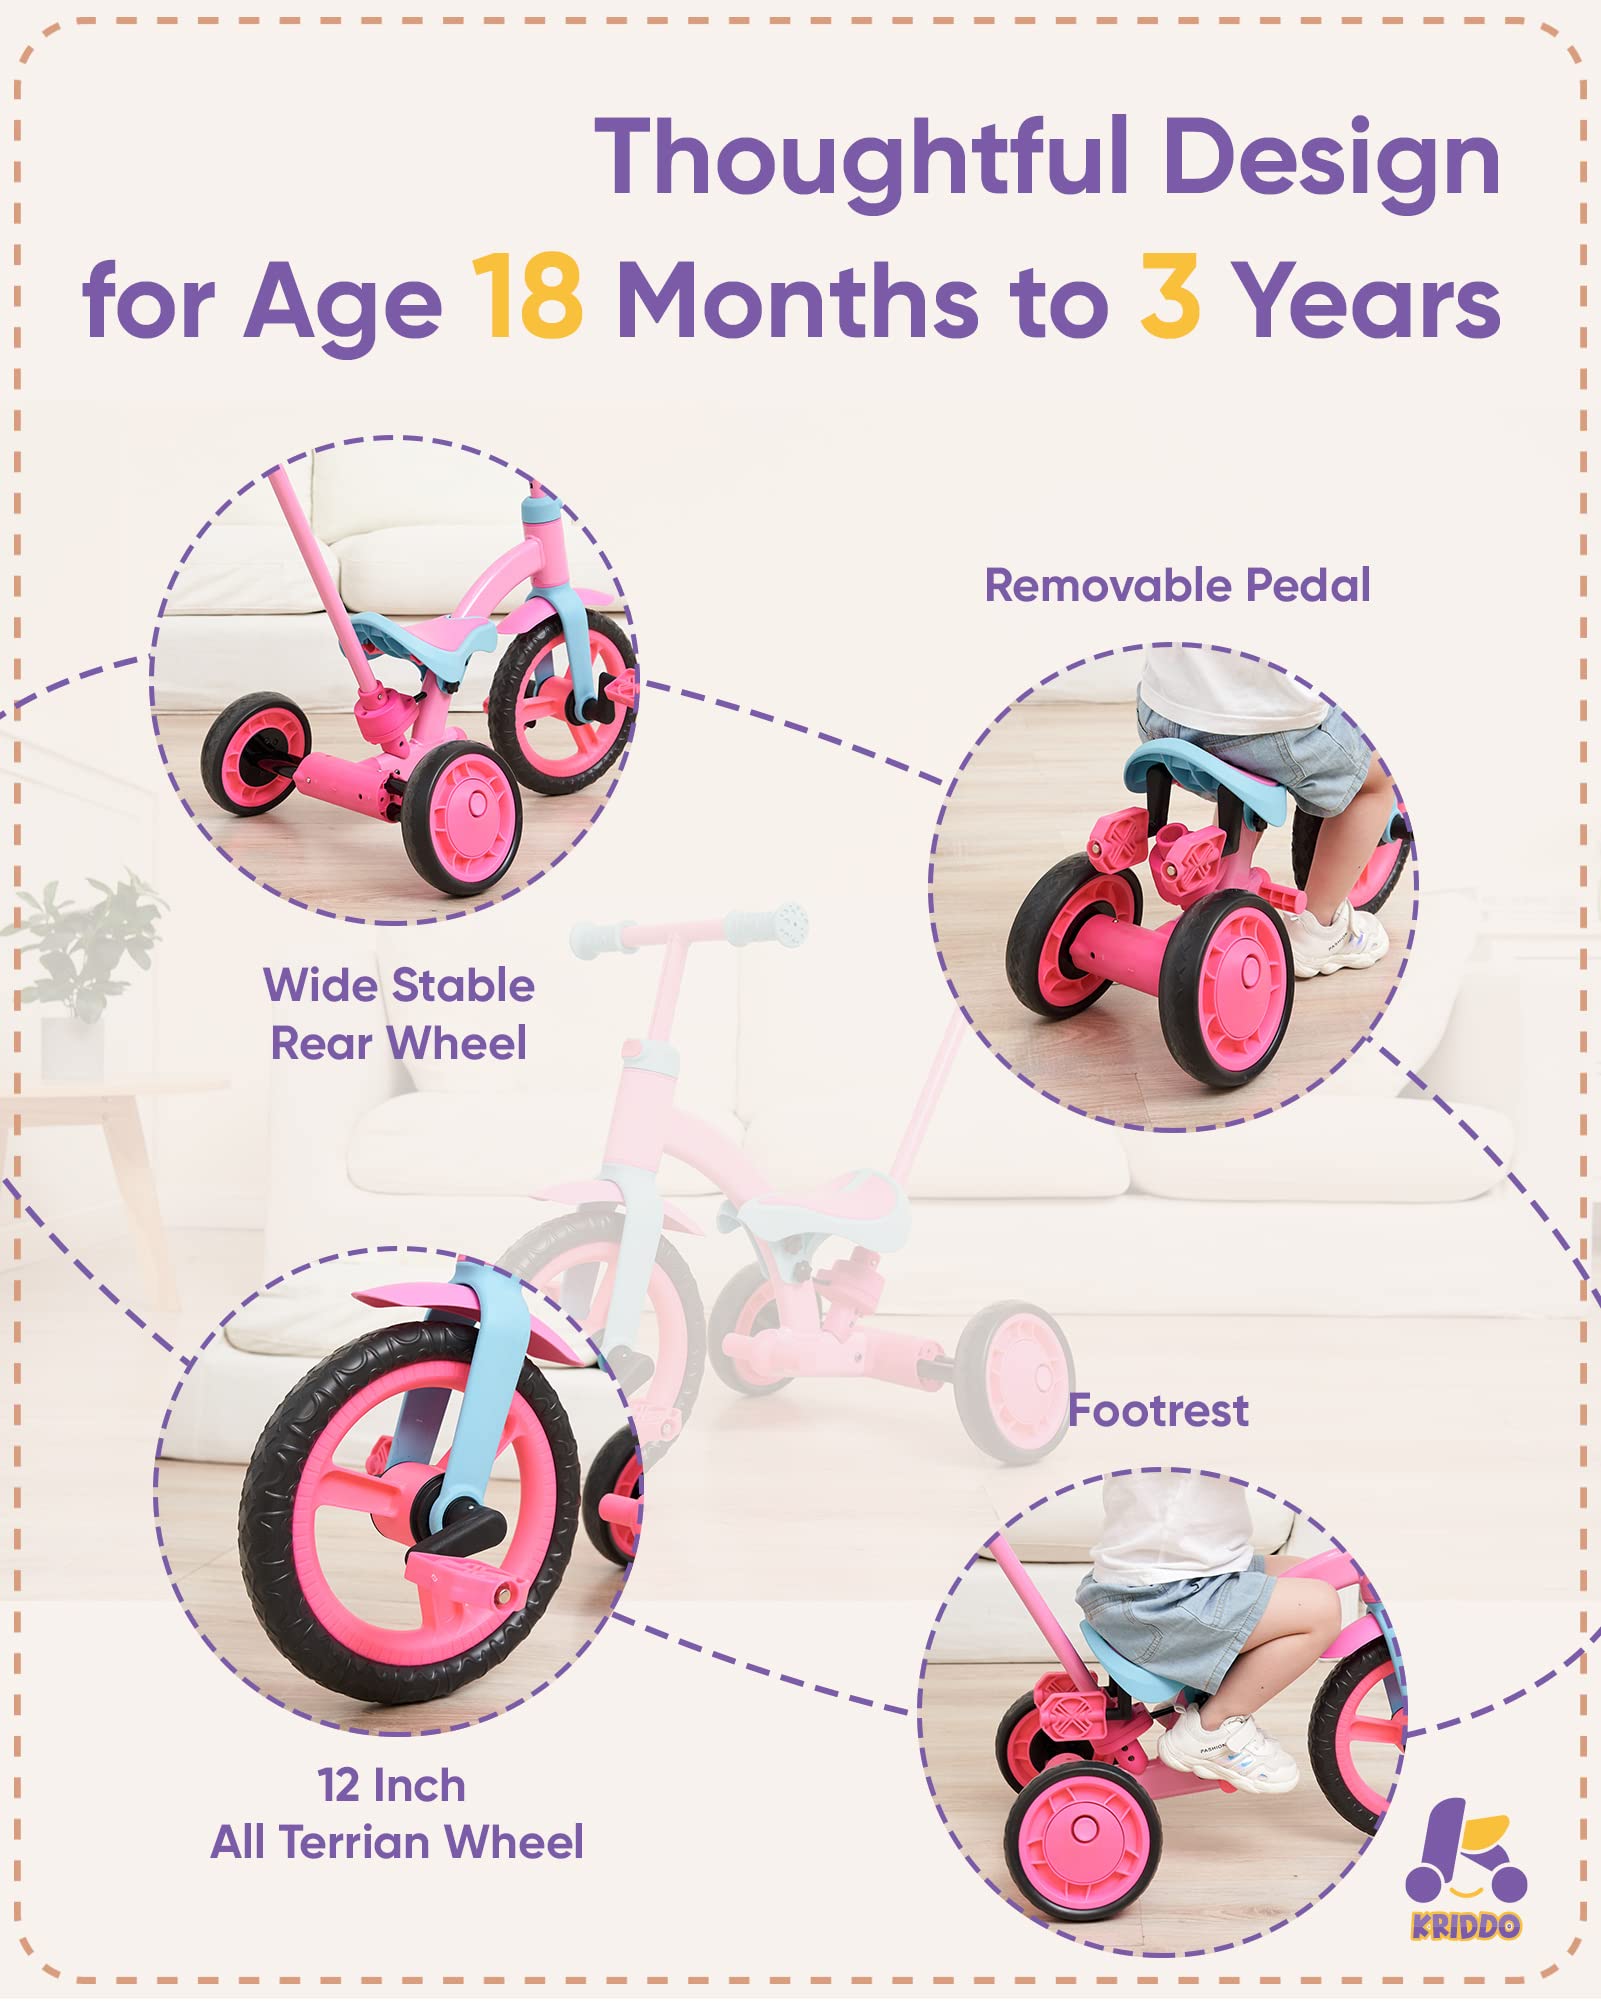 KRIDDO 4-in-1 Kids Tricycle for 1.5 to 3 Yea Old with Parent Steering Push Handle, Toddler Balance Bike, Adjustable, Pink